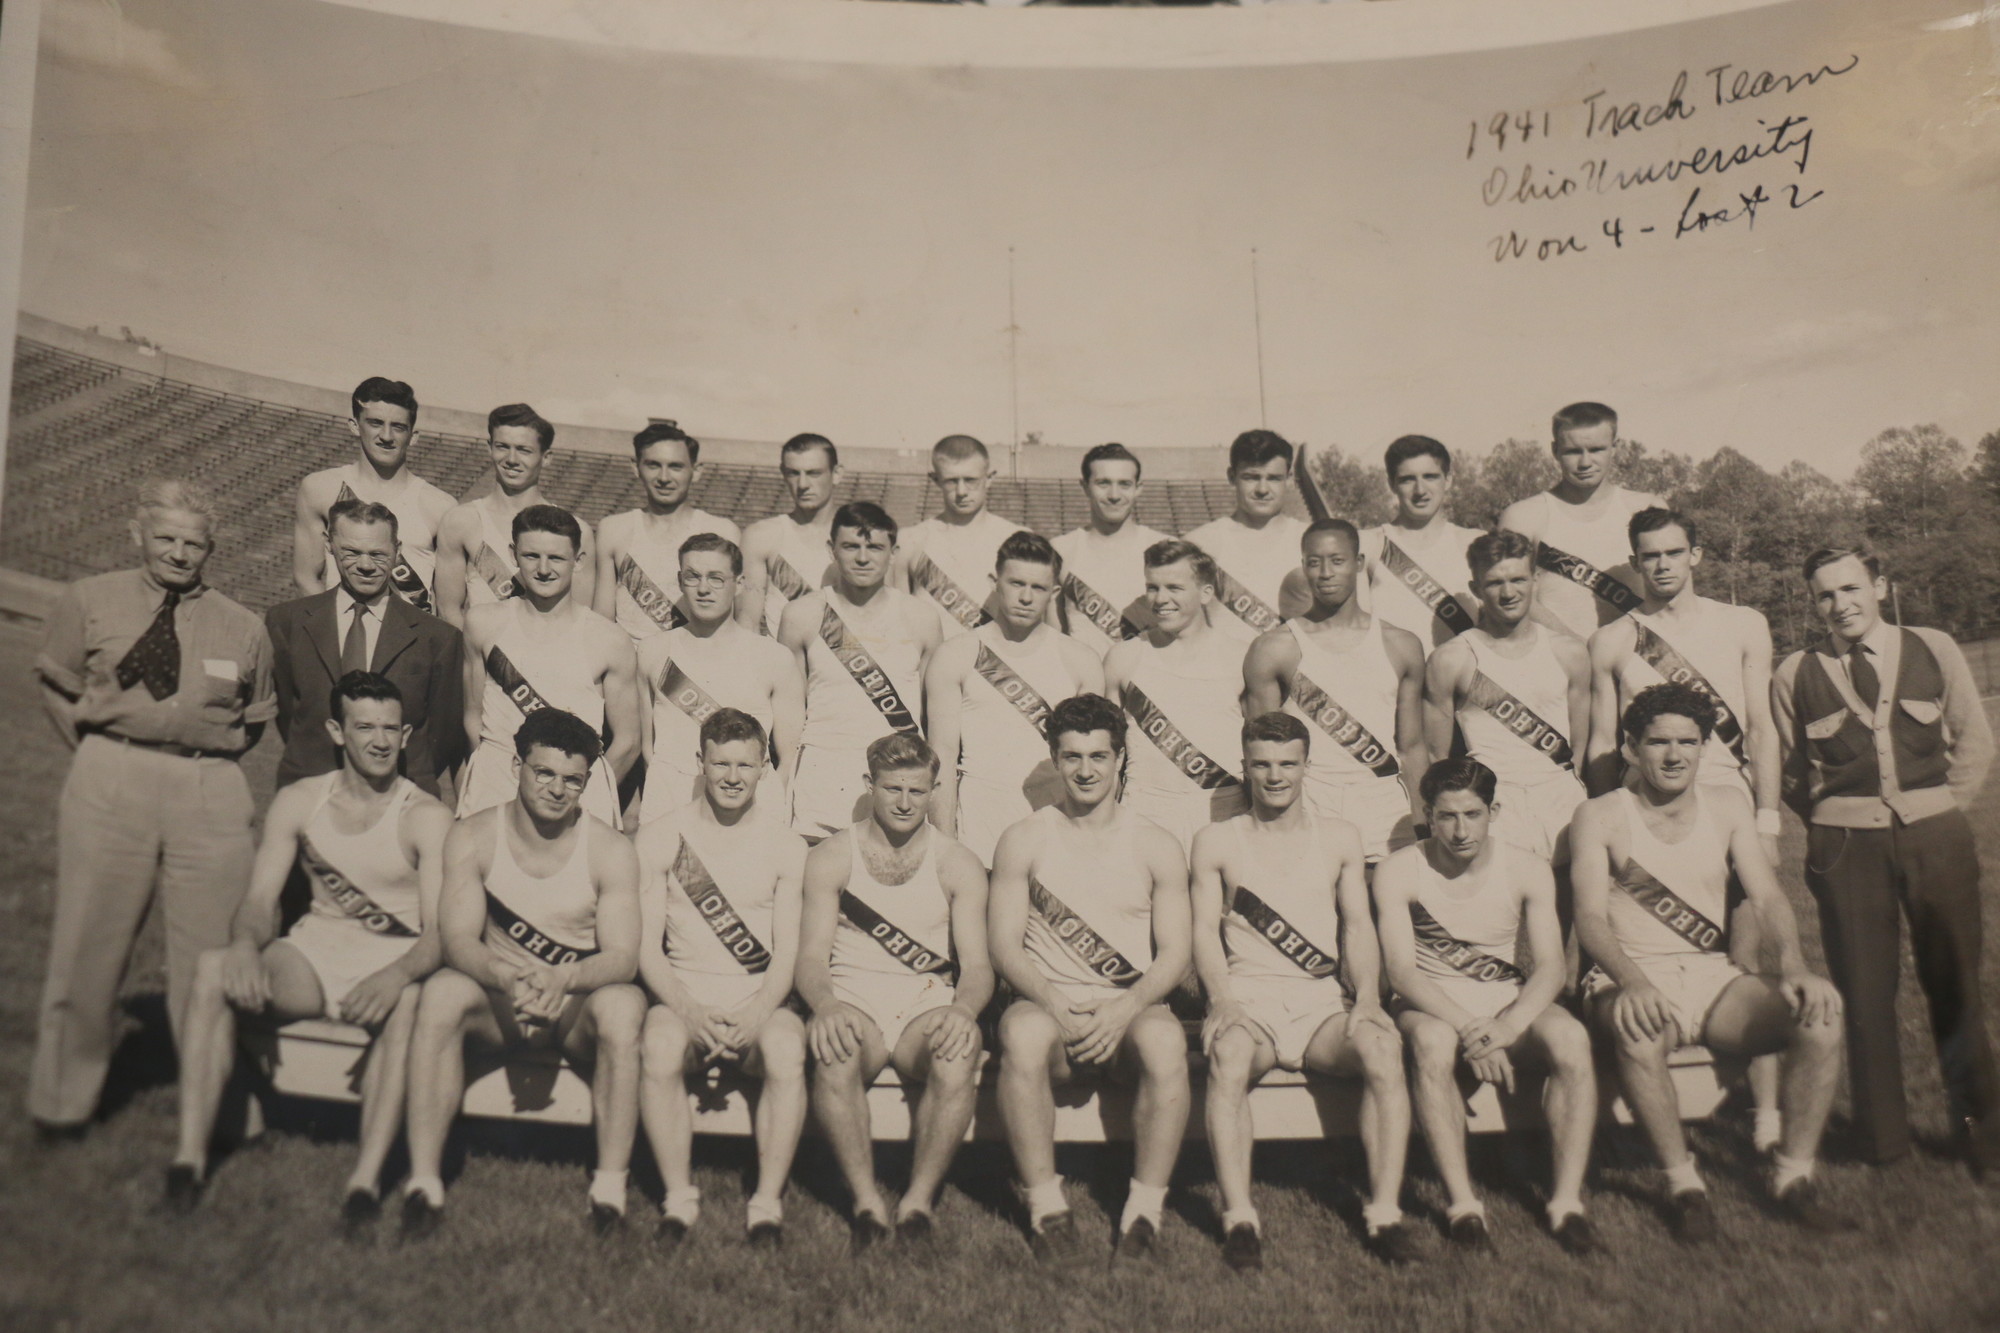 Benson ran track at Ohio University in 1941. He is third from left in the back row.